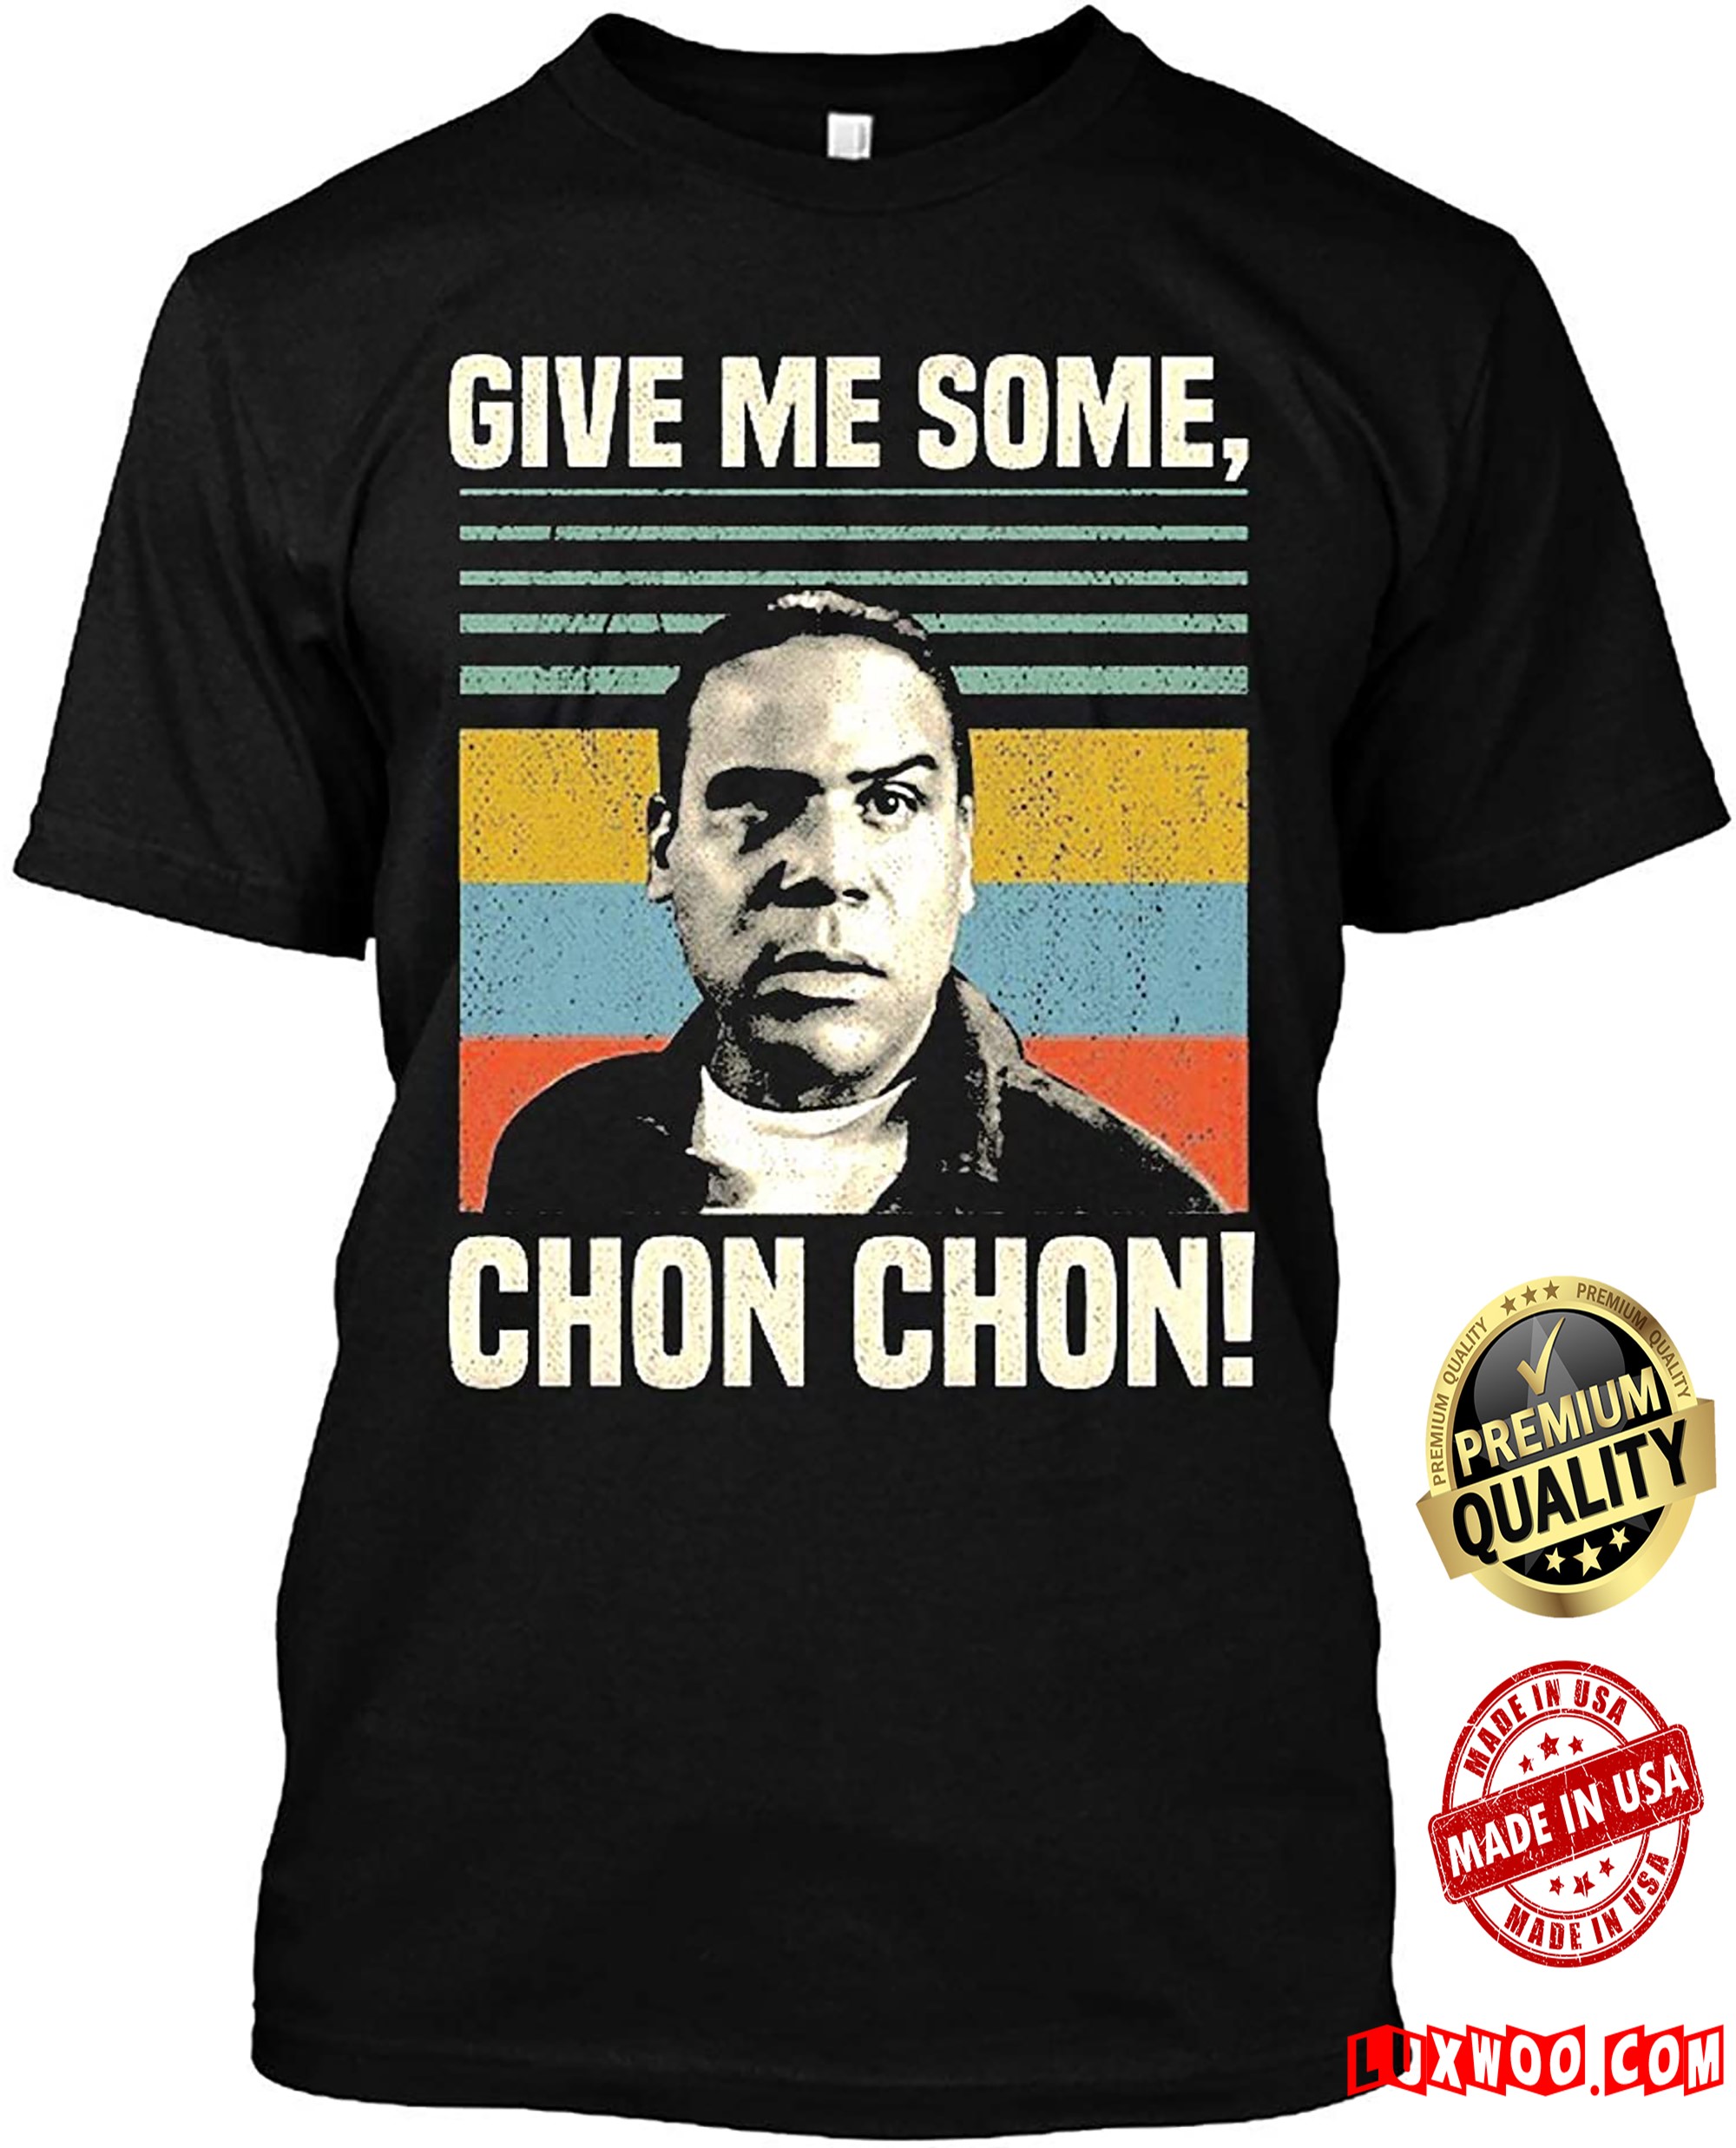 Blood In Blood Out Give Me Some Chon Chon Shirt Black